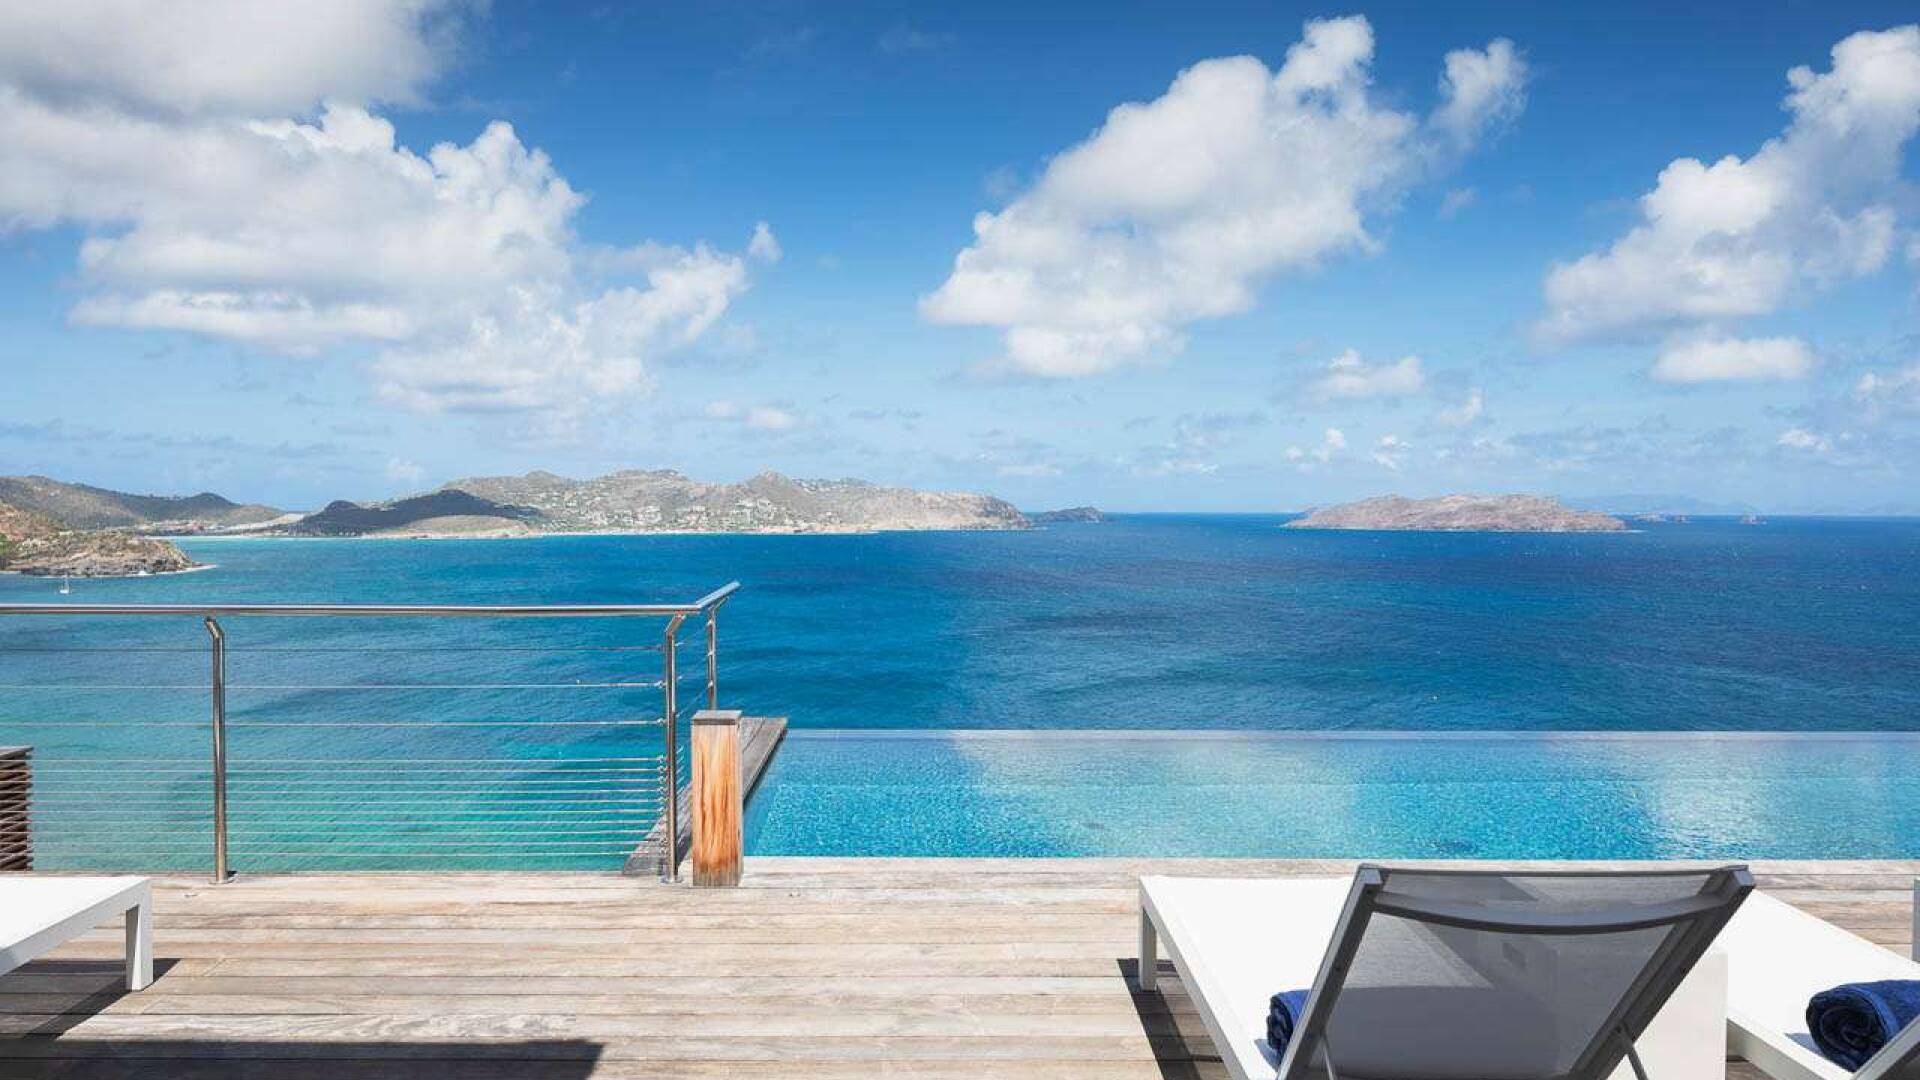 The view from WV CAA, Pointe Milou, St. Barthelemy